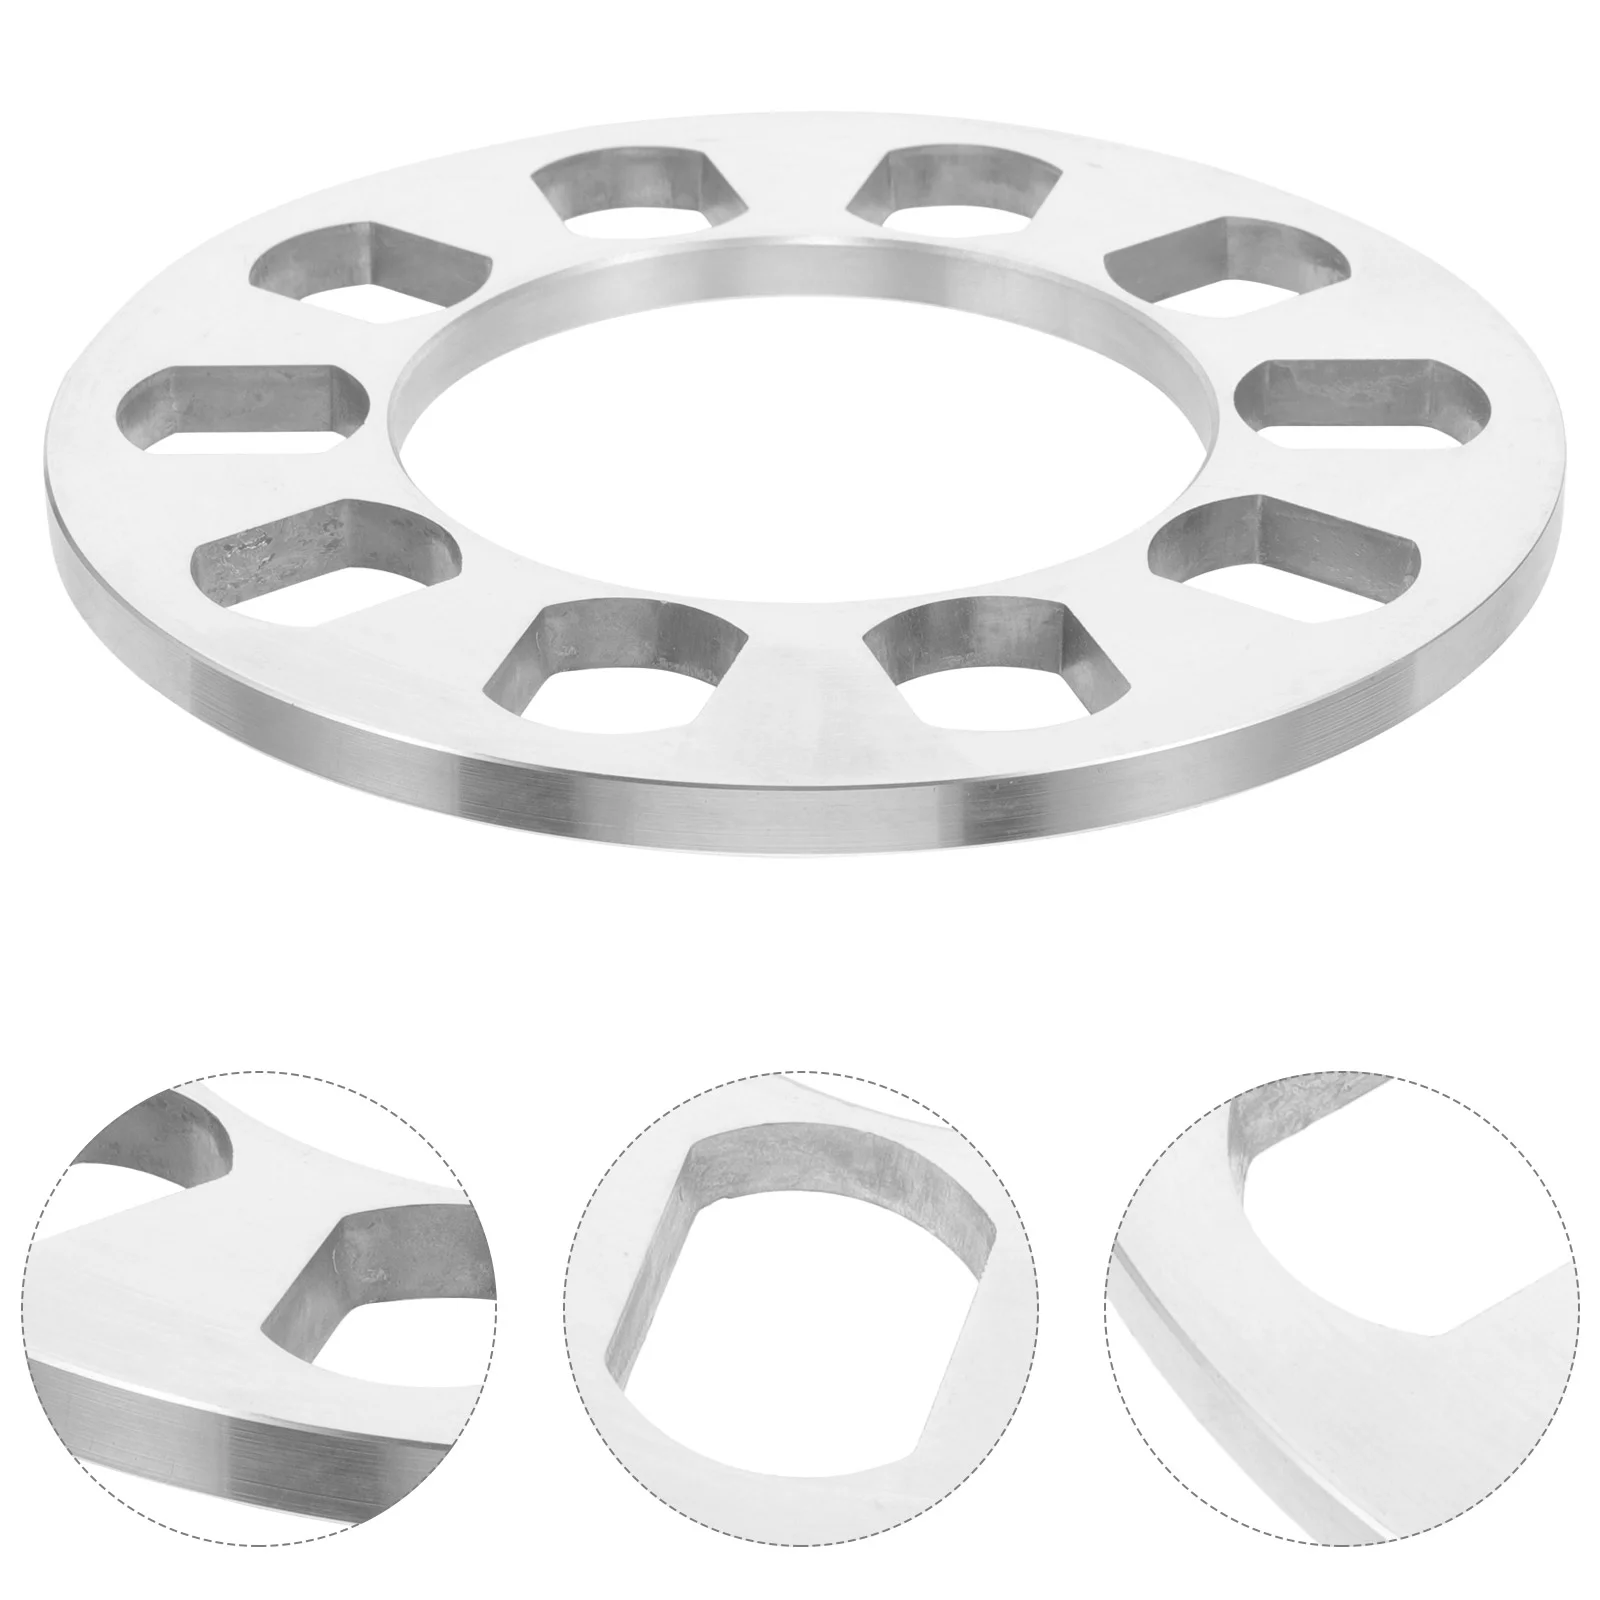 

2pcs Hub Centric Wheel Spacer 5 Holes Center Bore Wheel Spacer Plate Vehicle Part